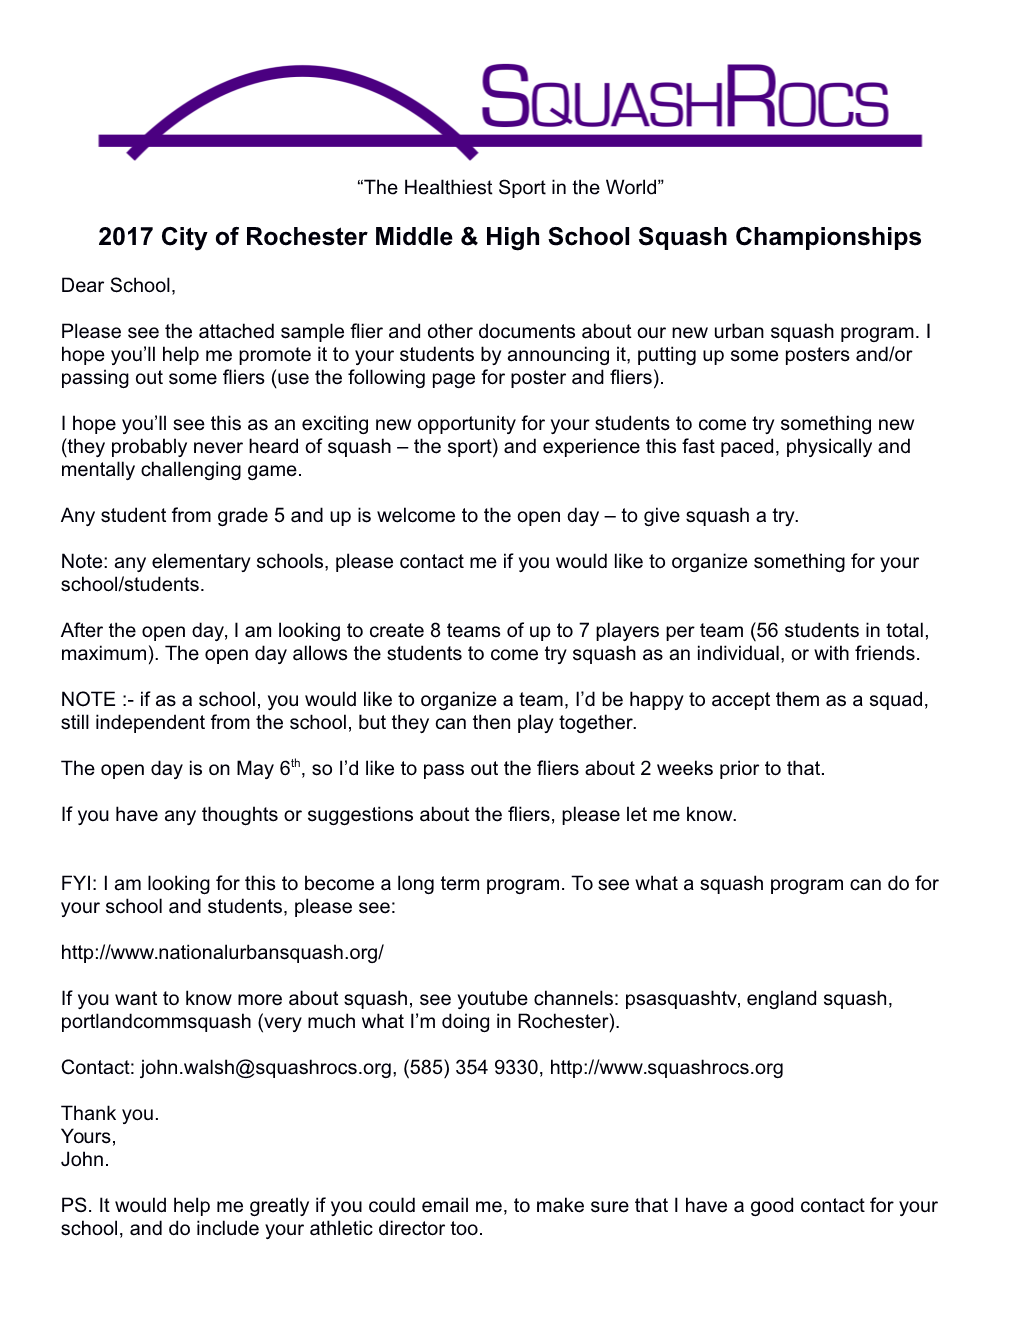 2017 City of Rochester Middle & High School Squash Championships